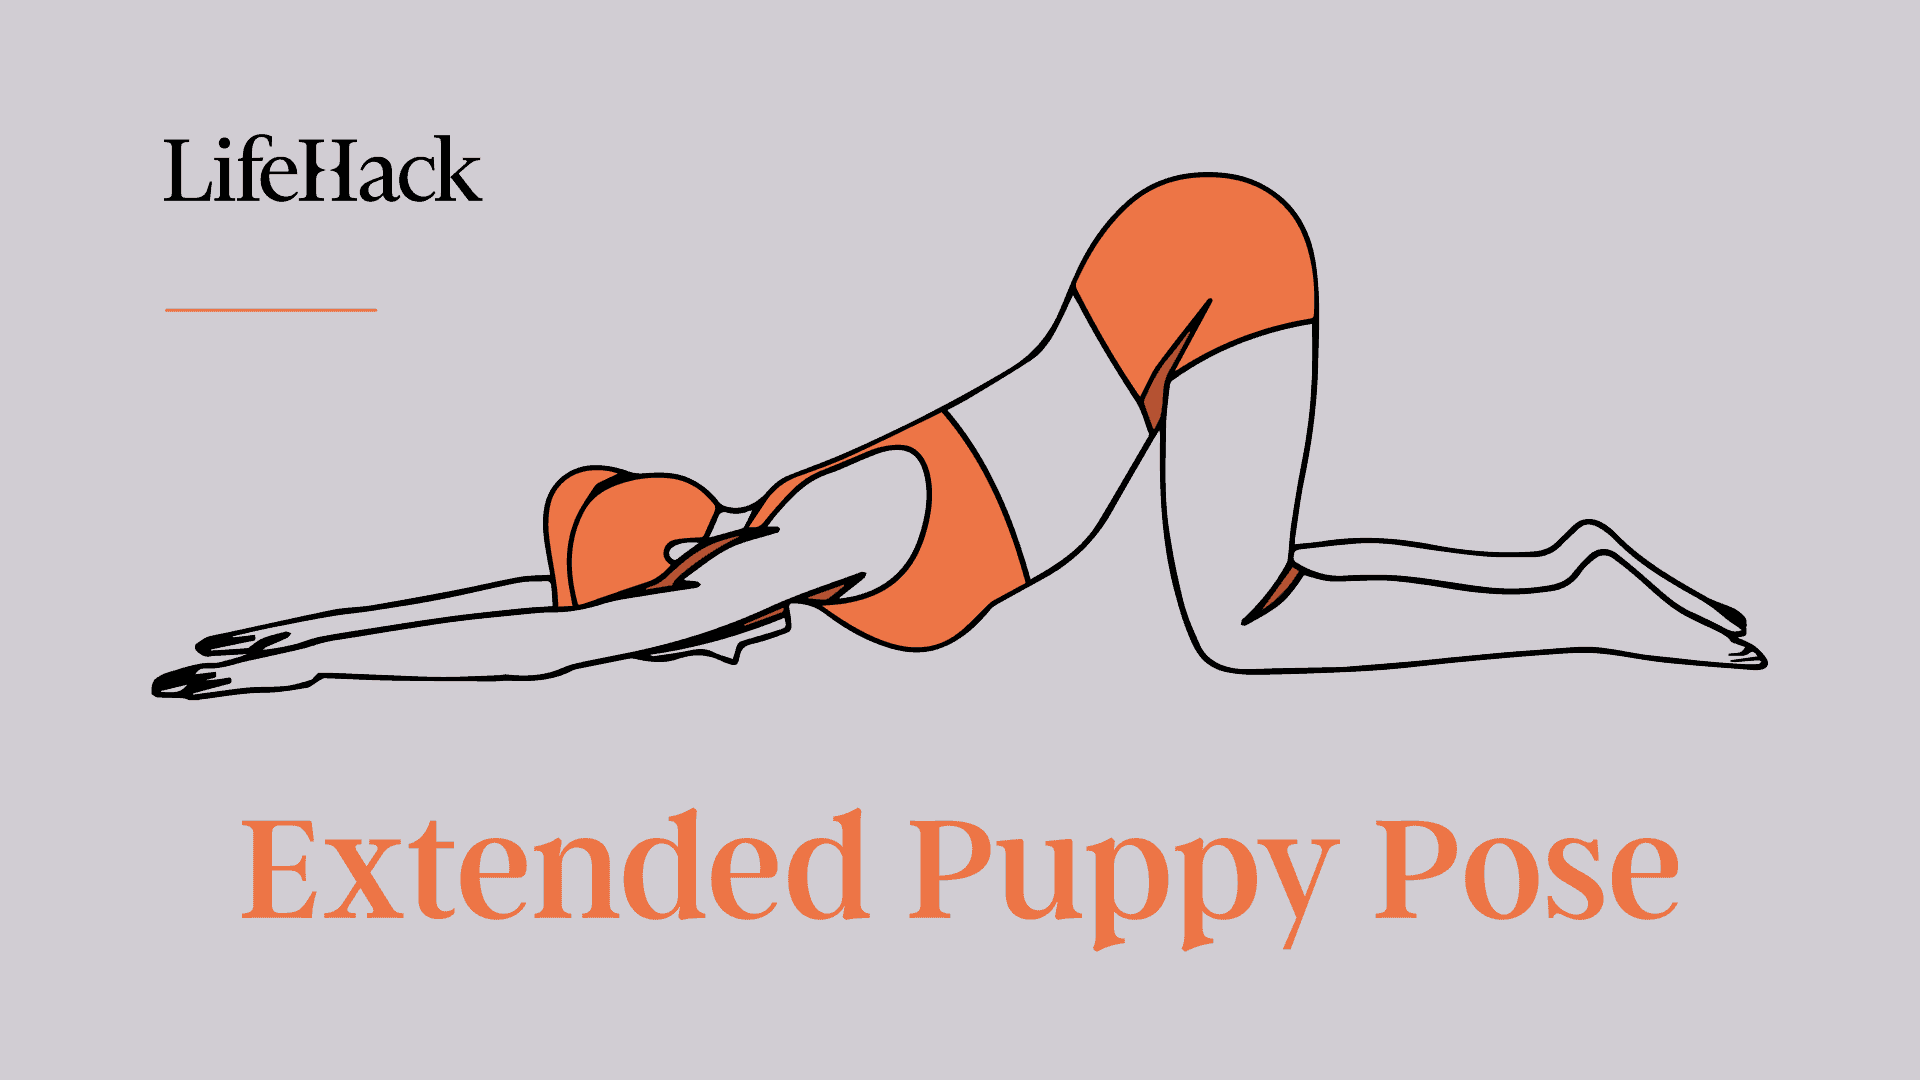 Extended Puppy Pose